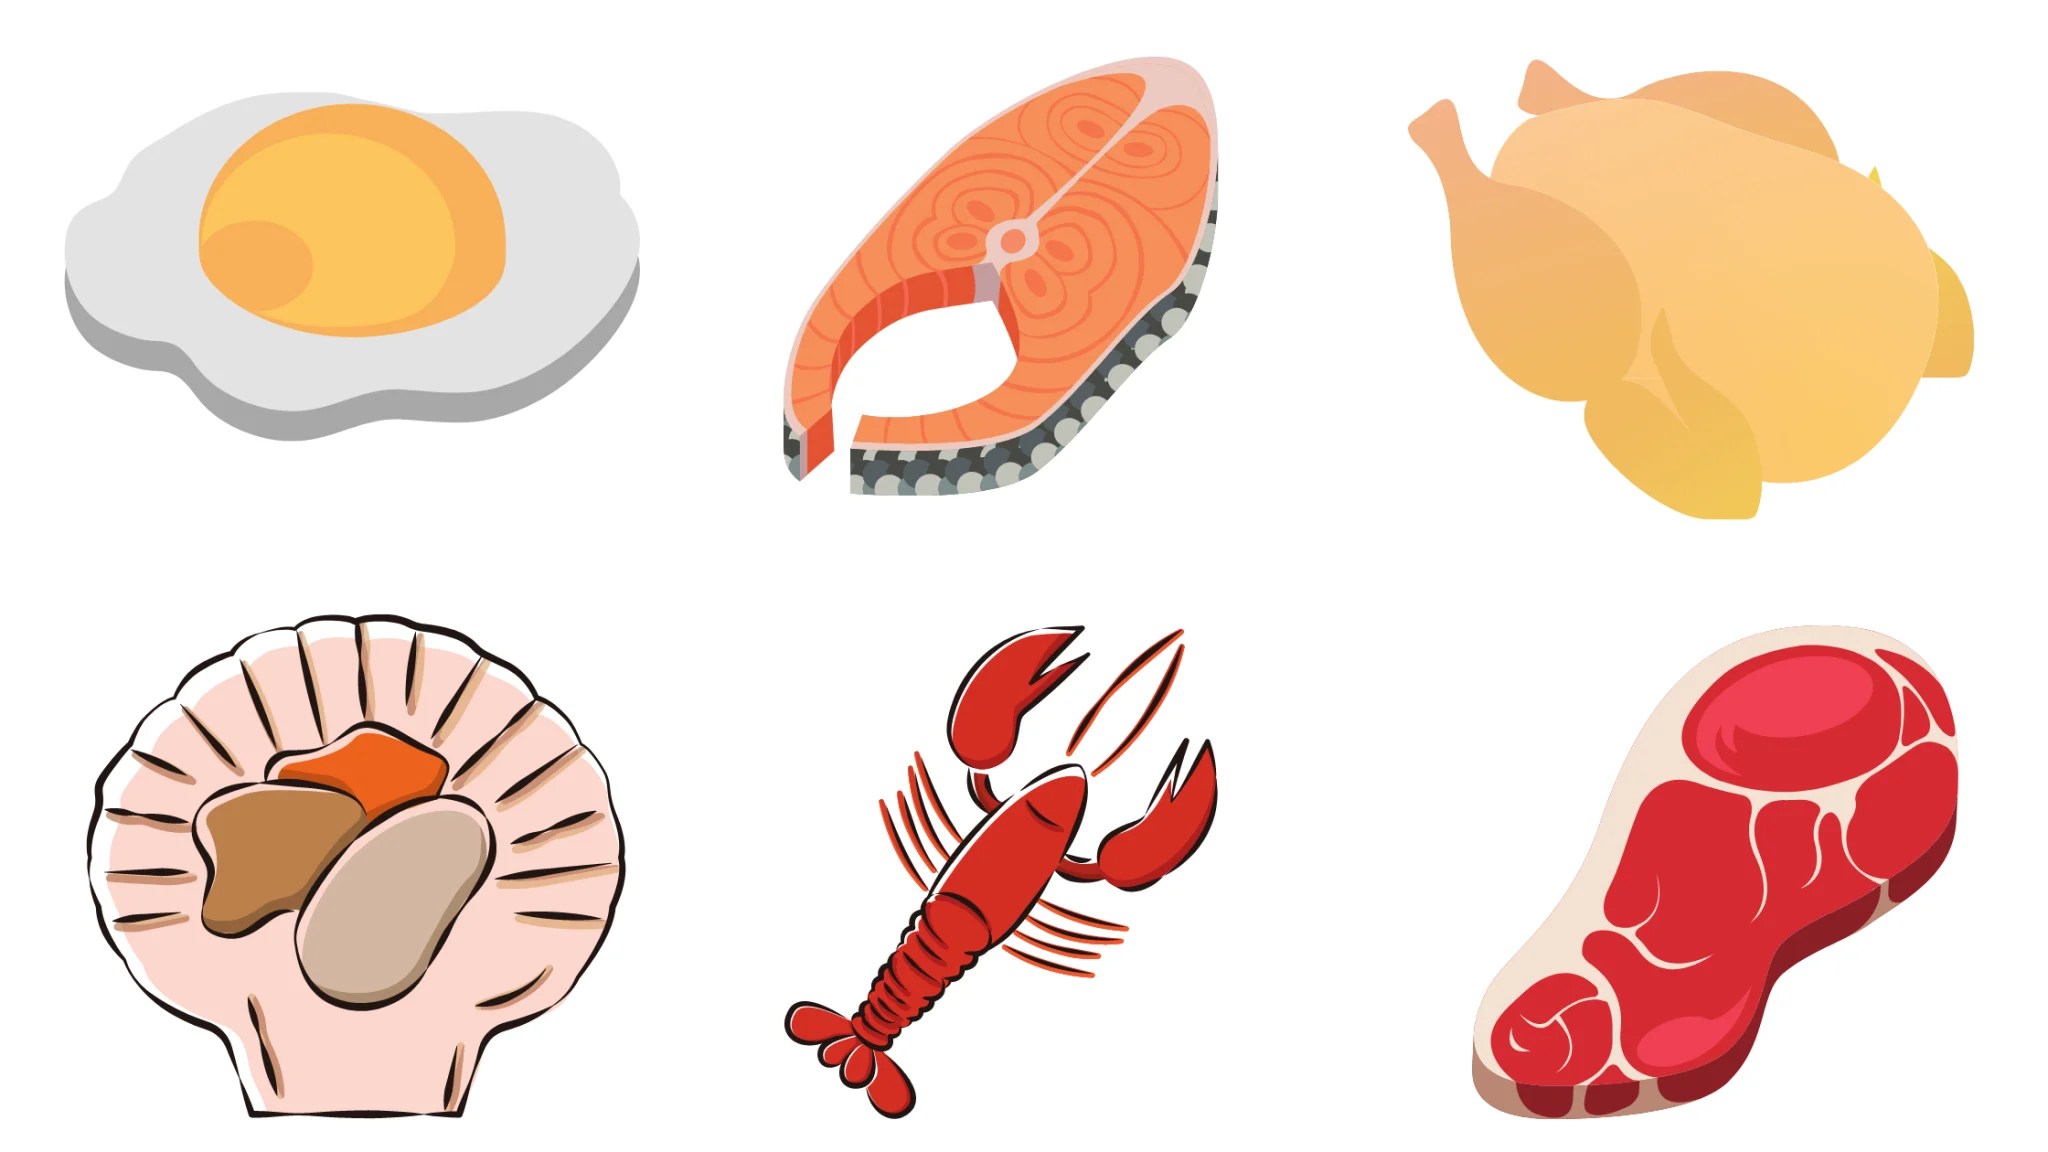 examples of protein sources such as eggs, salmon, shellfish, chicken, beef and lobster